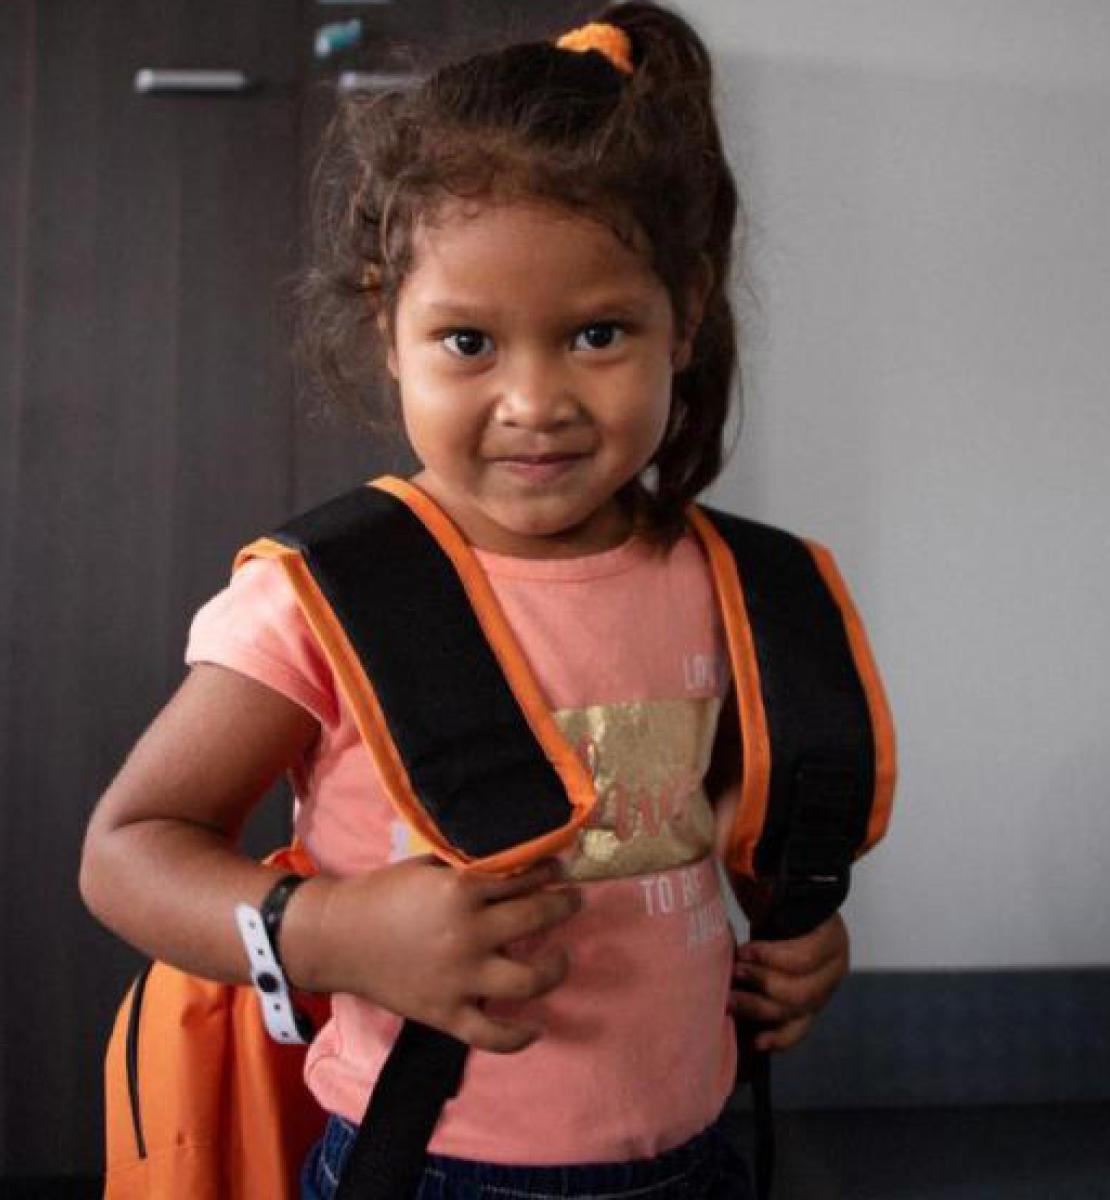 A little girl with a small smile and looks stoically towards the camera as she grasps the straps of her backpack.